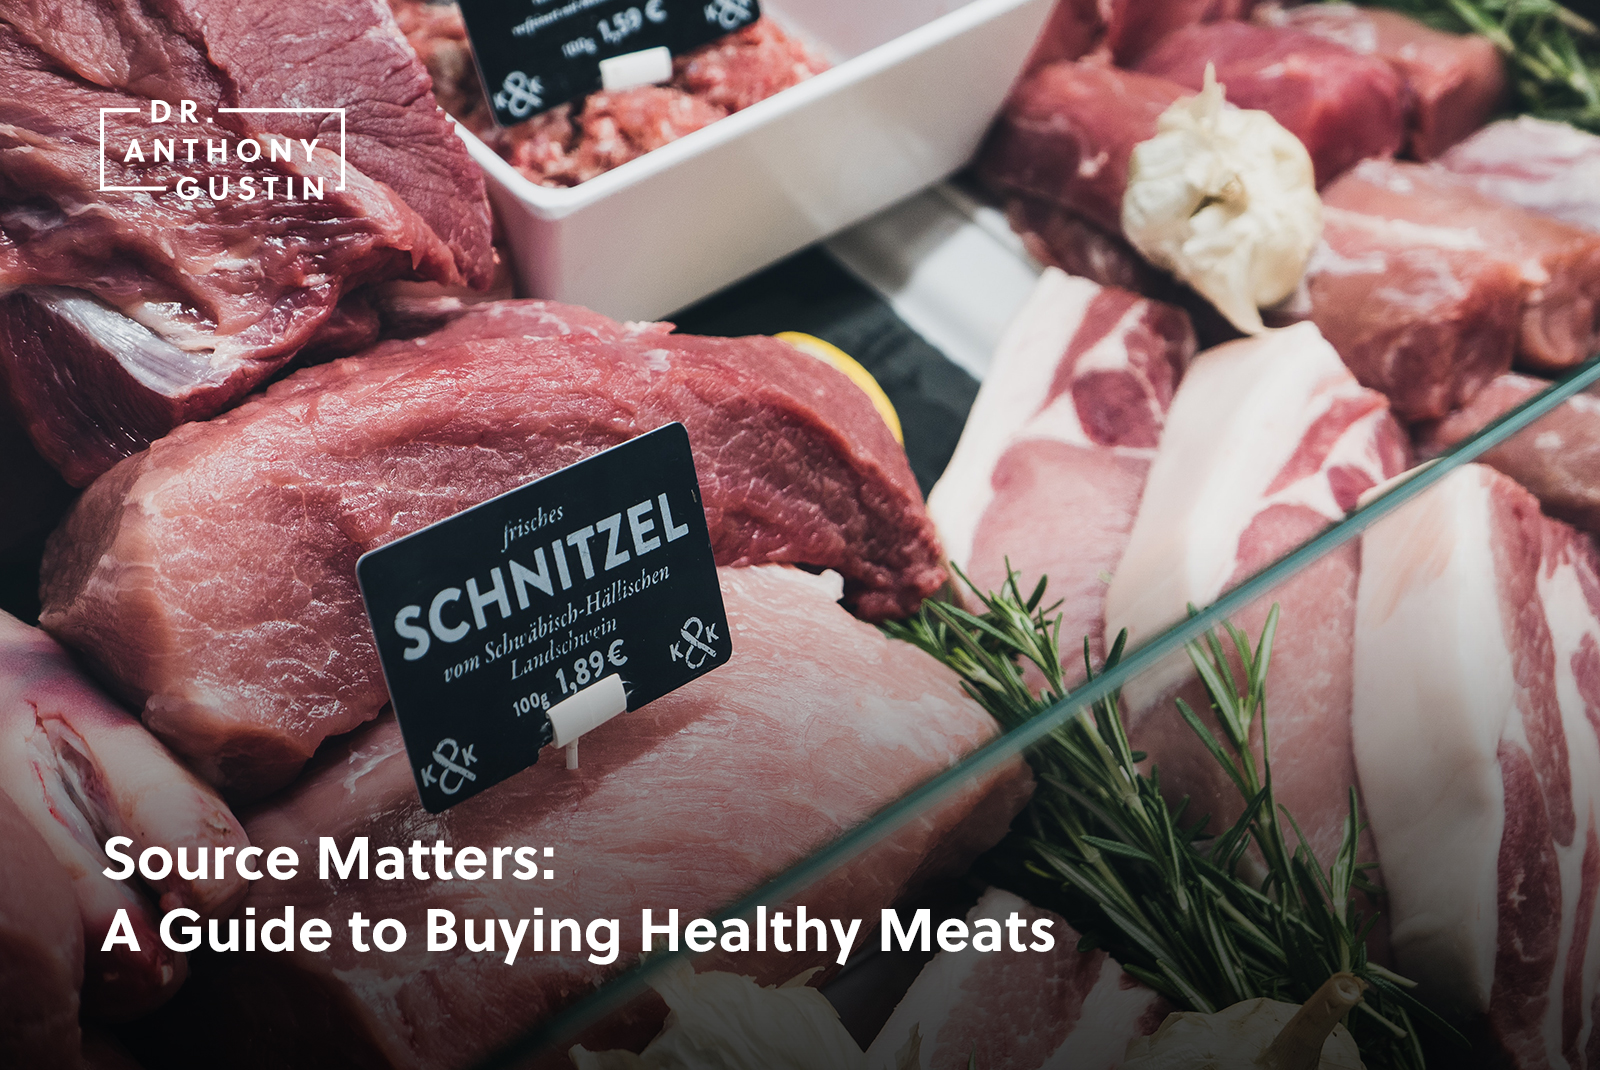 Source Matters: A Guide to Buying Healthy Meats - Dr. Anthony Gustin